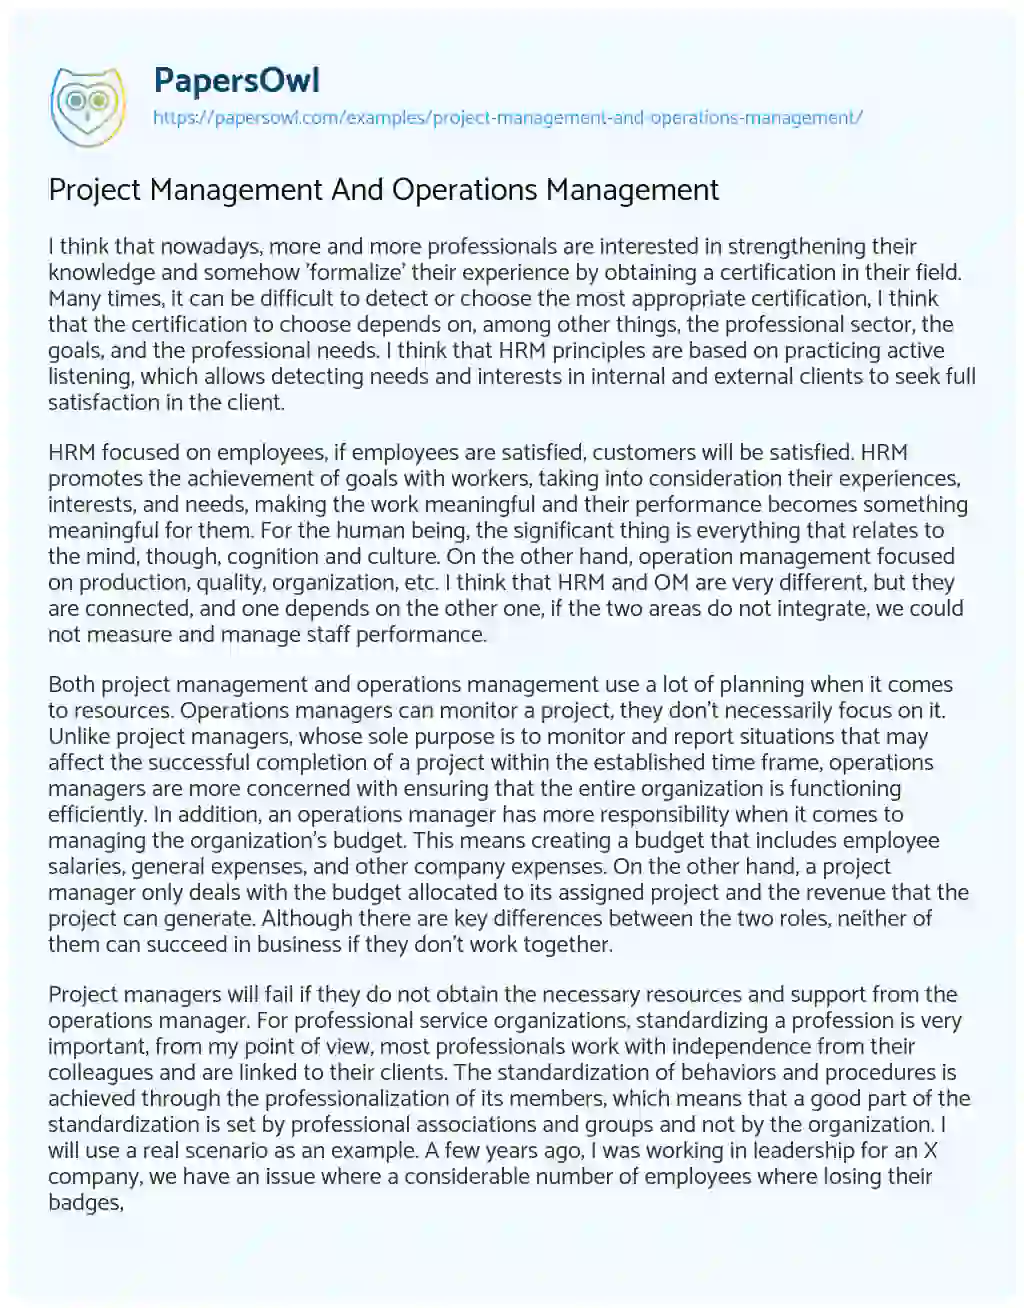 Essay on Project Management and Operations Management